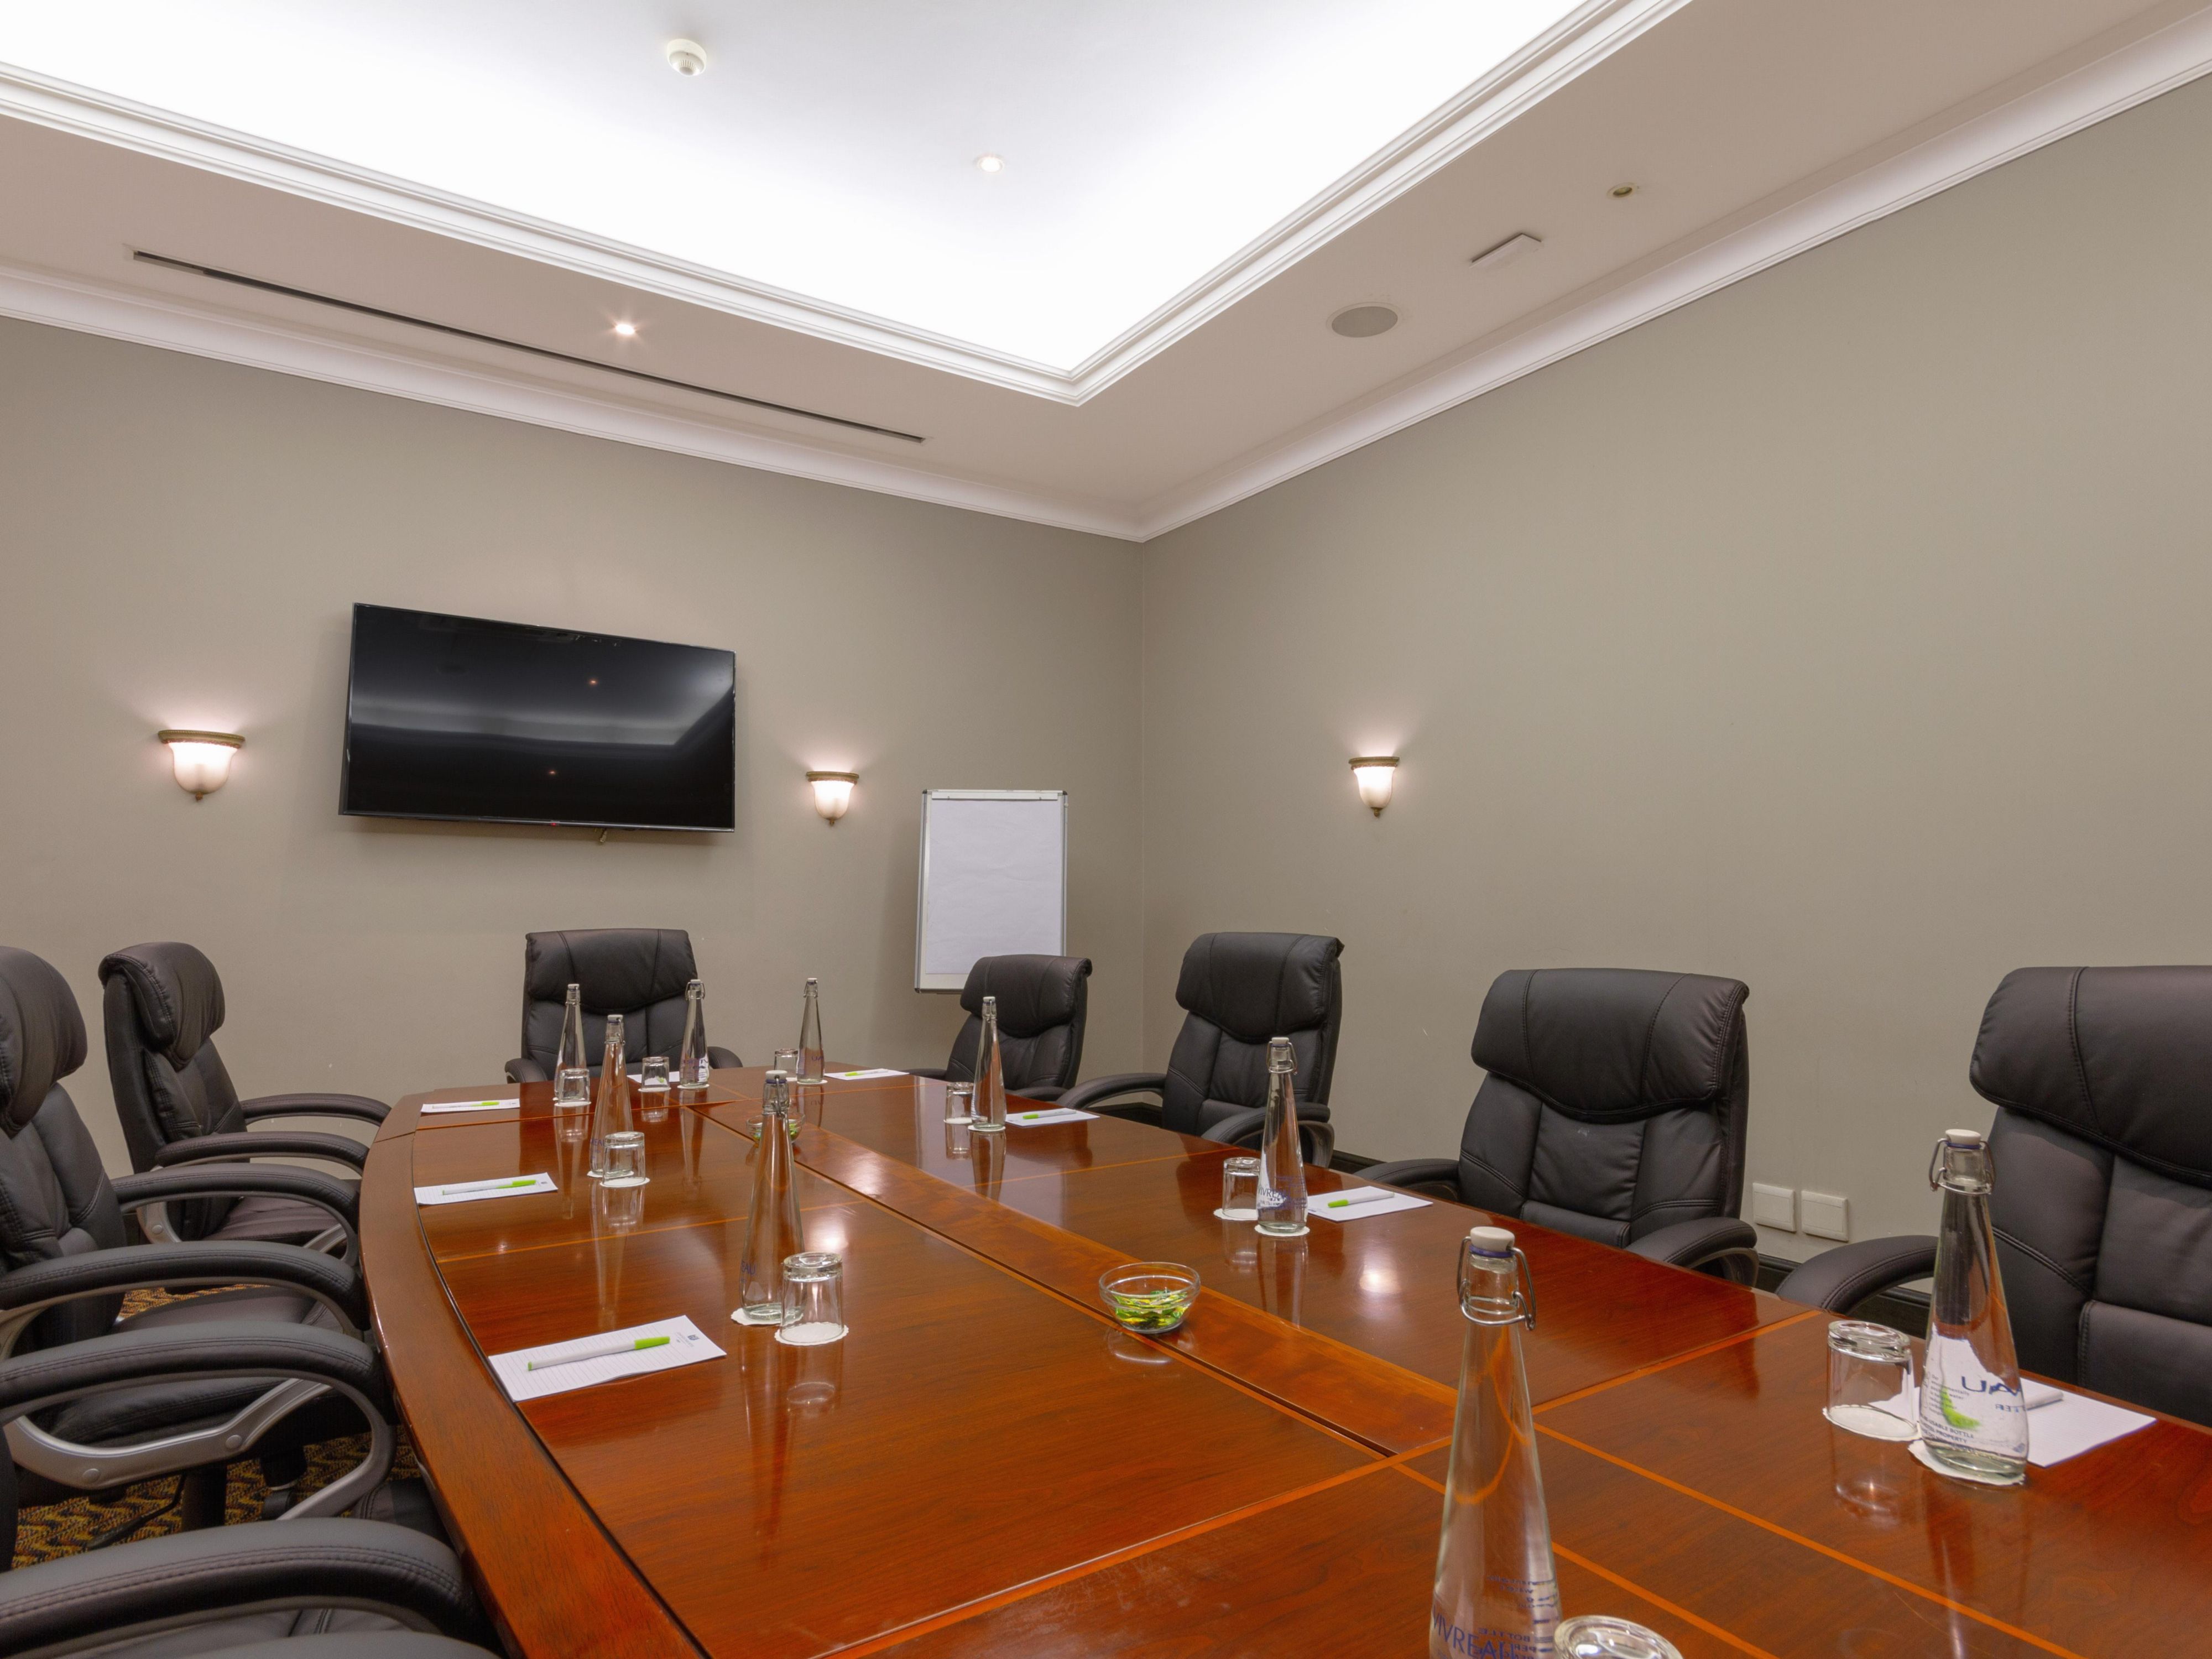 Impress your delegates with one of our 10 onsite conference rooms, which can cater for groups from 2 - 300 people depending on seating style. 
All of our conference rooms come equipped with fast, complimentary Wi-Fi and all the necessities needed to up your conferencing game. 